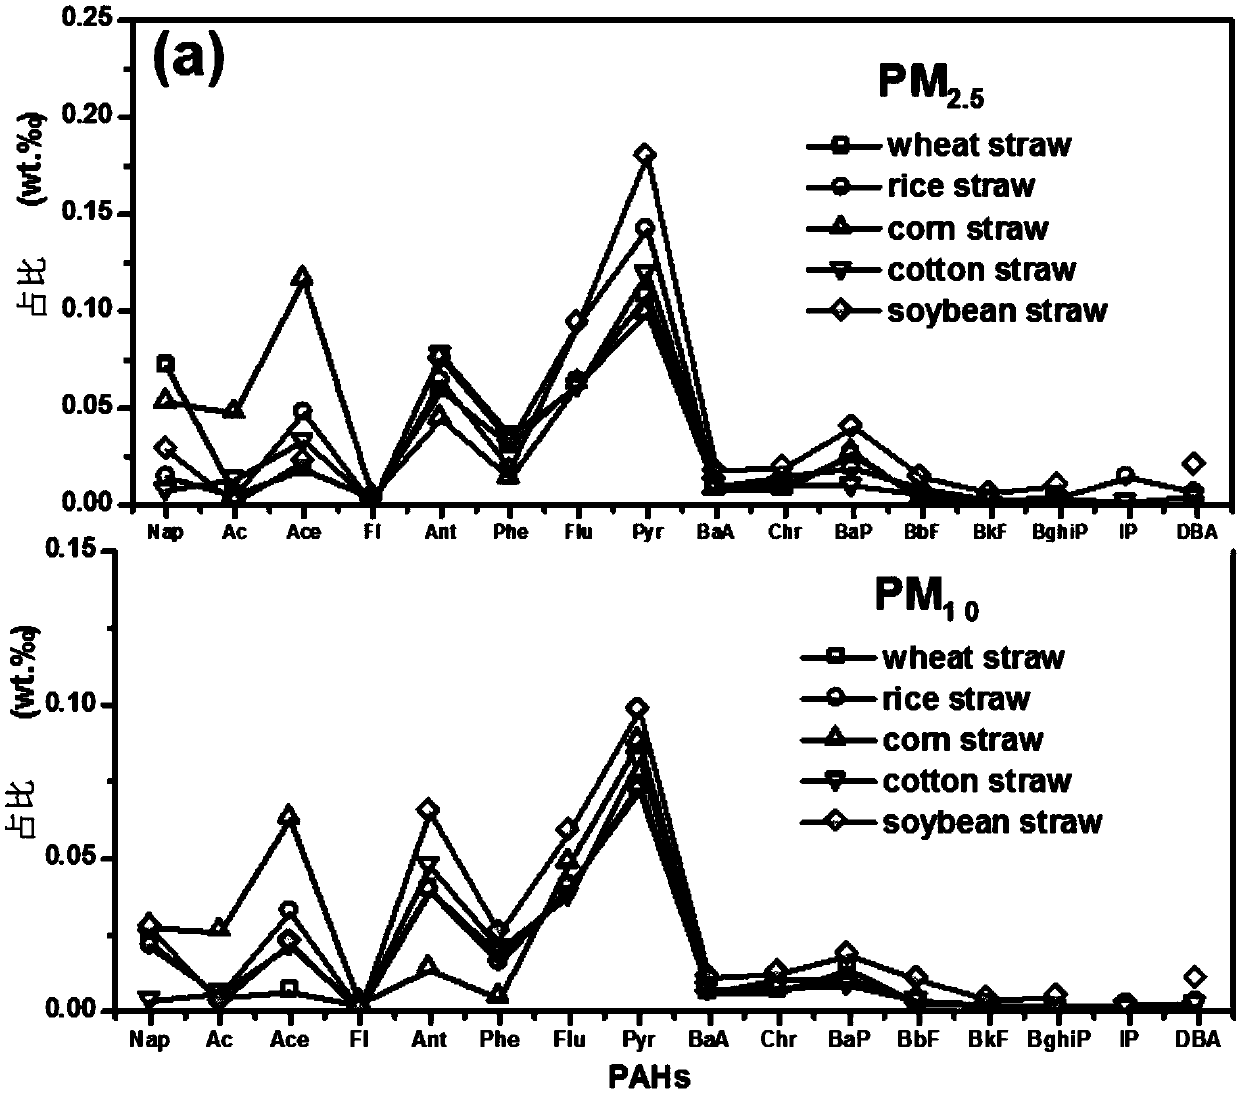 Aerosol system for measuring concentration of polycyclic aromatic hydrocarbons in atmospheric particulates